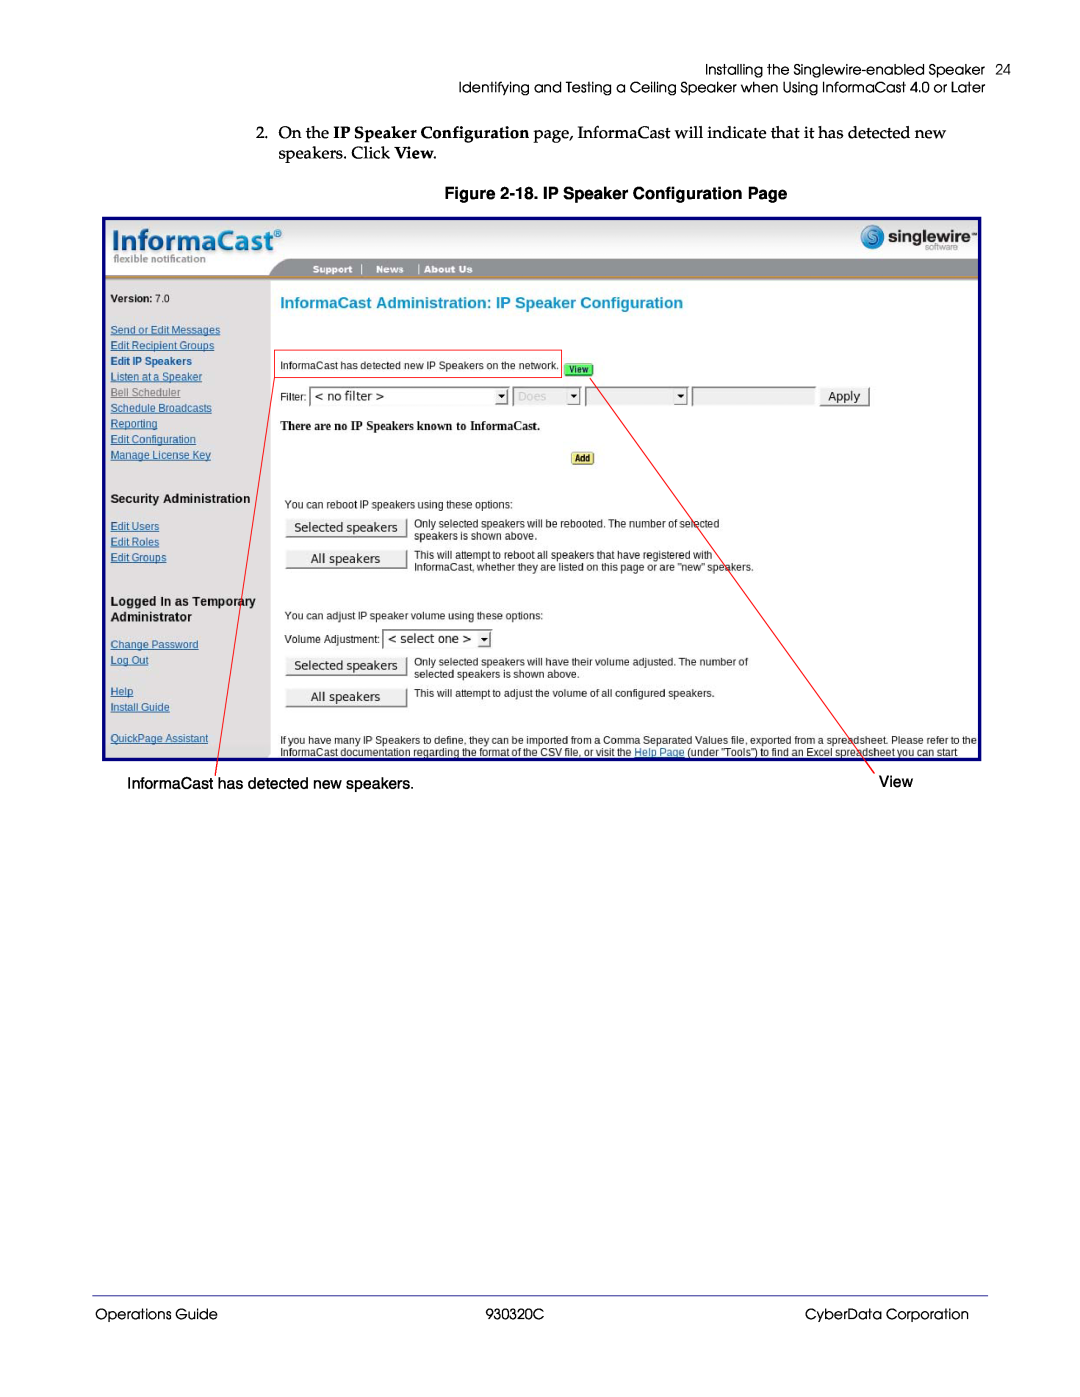 CyberData 11103 18.IP Speaker Configuration Page, Installing the Singlewire-enabledSpeaker, Operations Guide, 930320C 